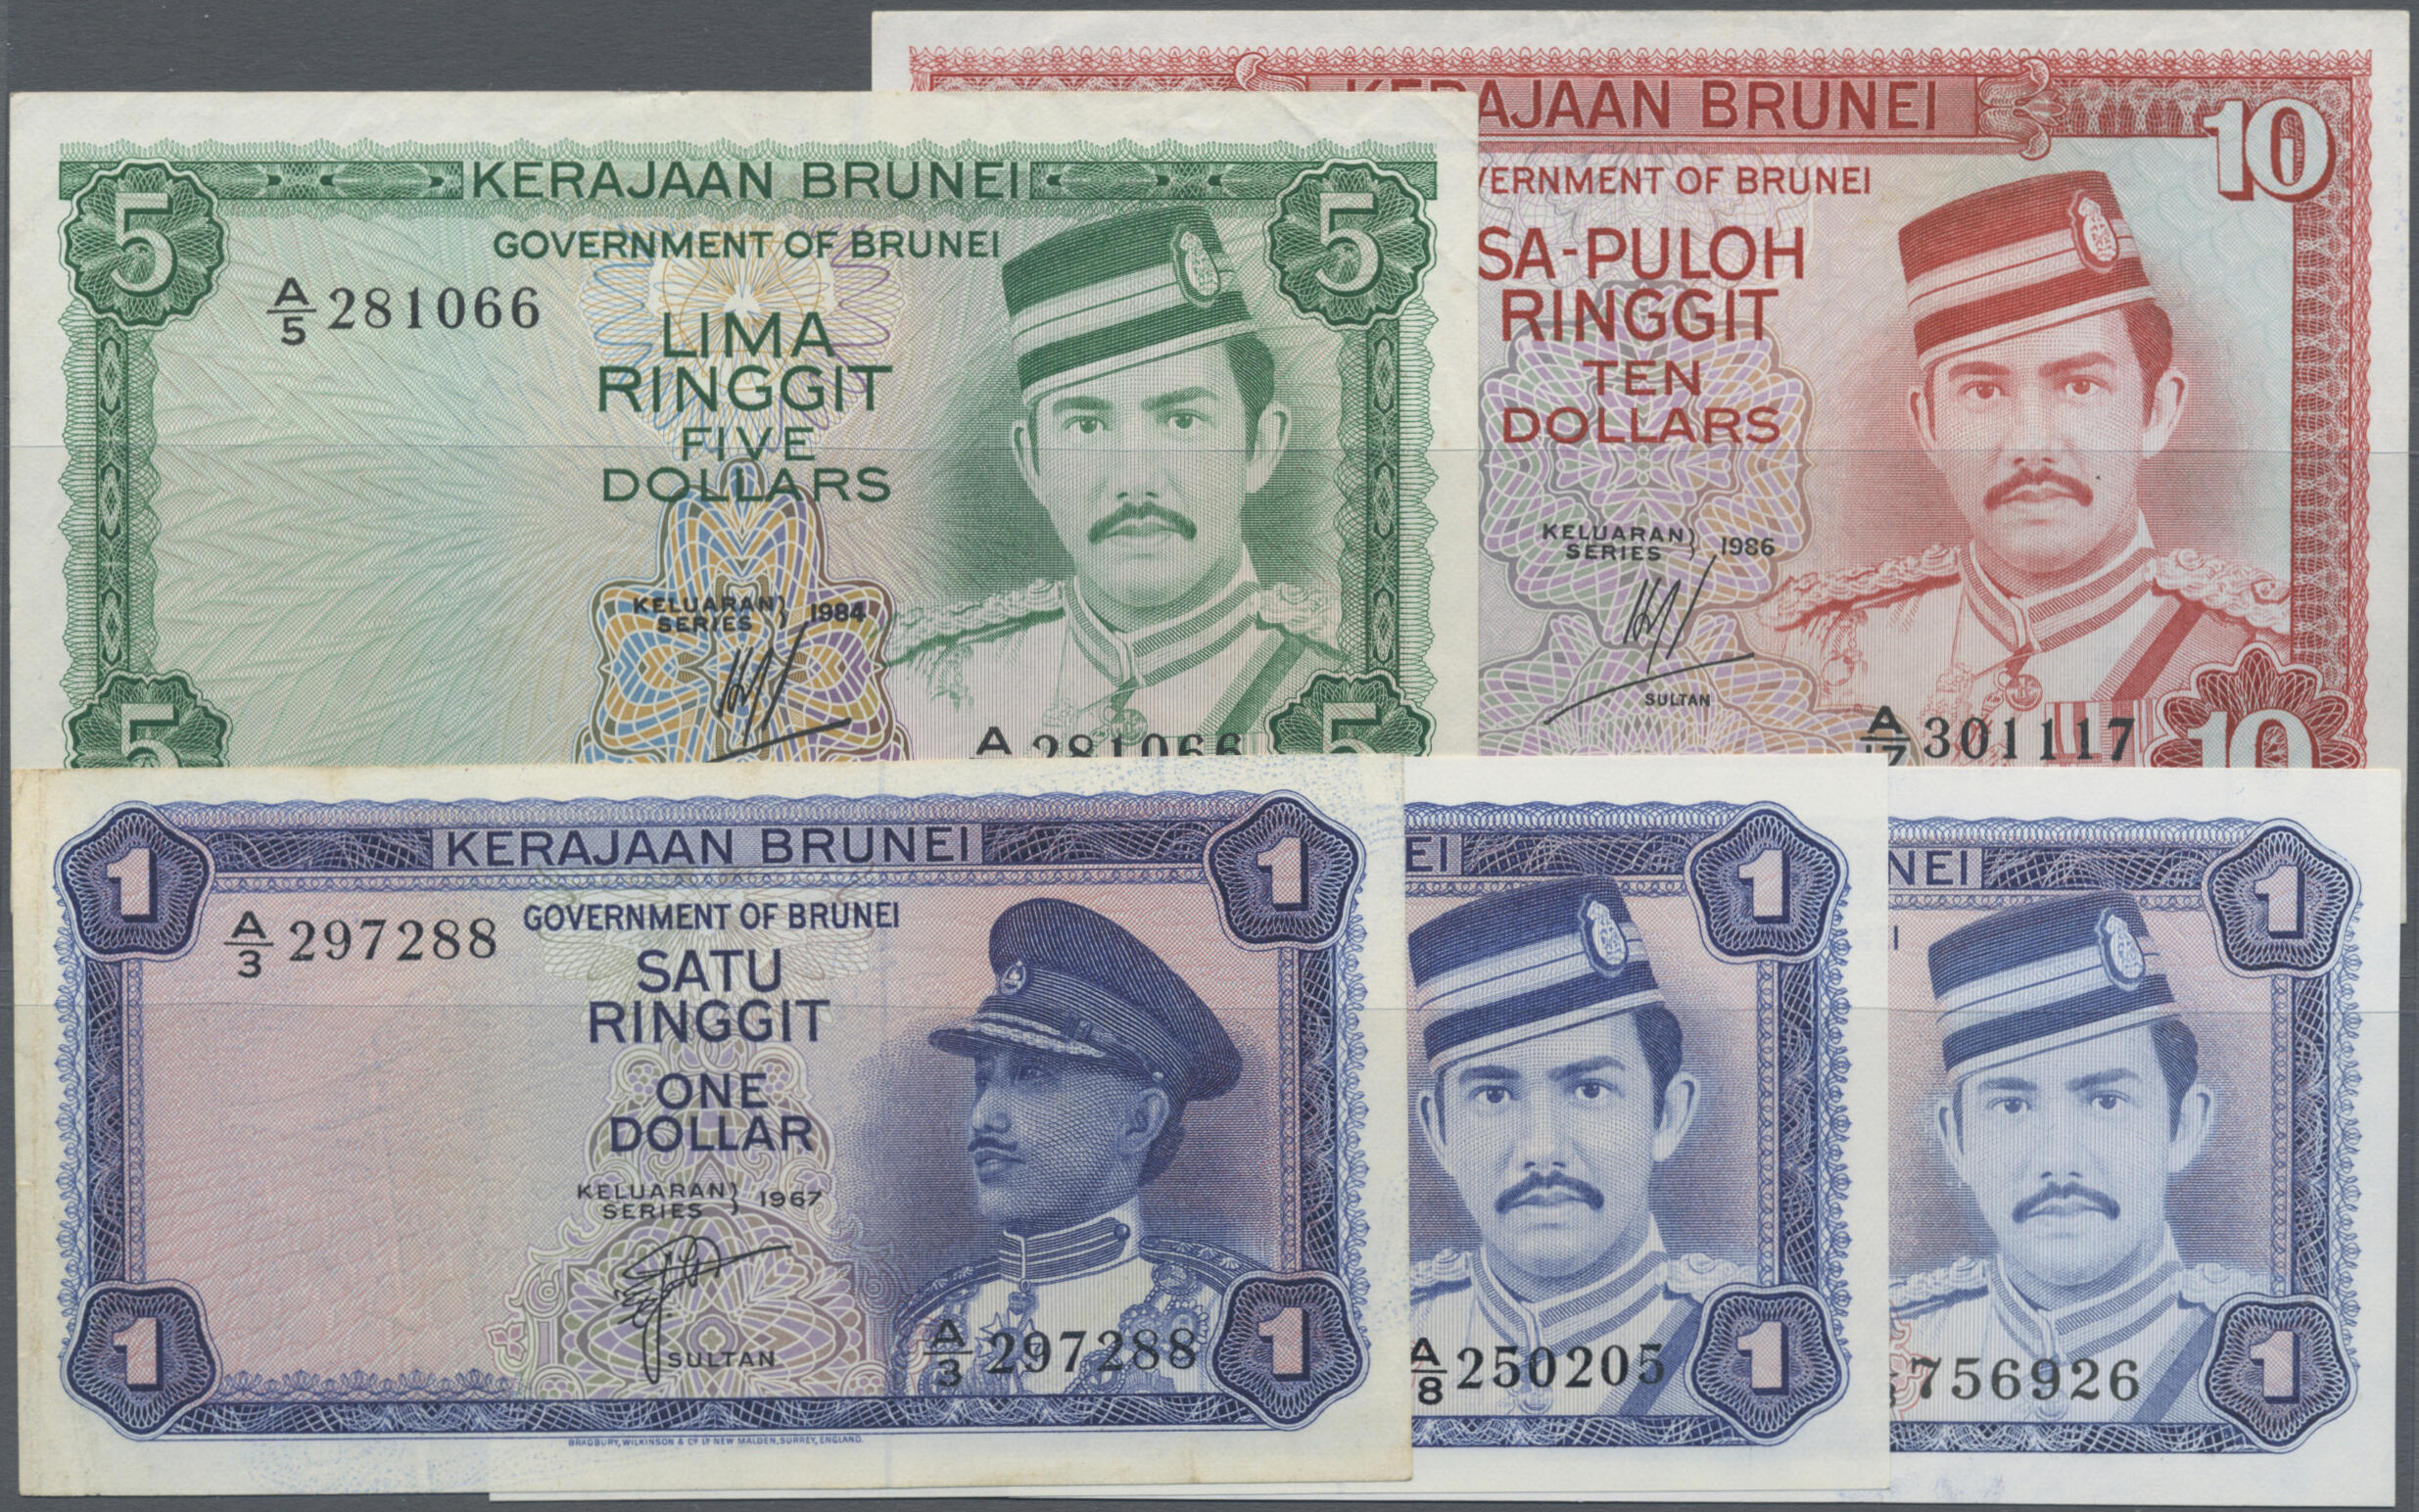 110.570.100: Banknotes – Asia - Brunei